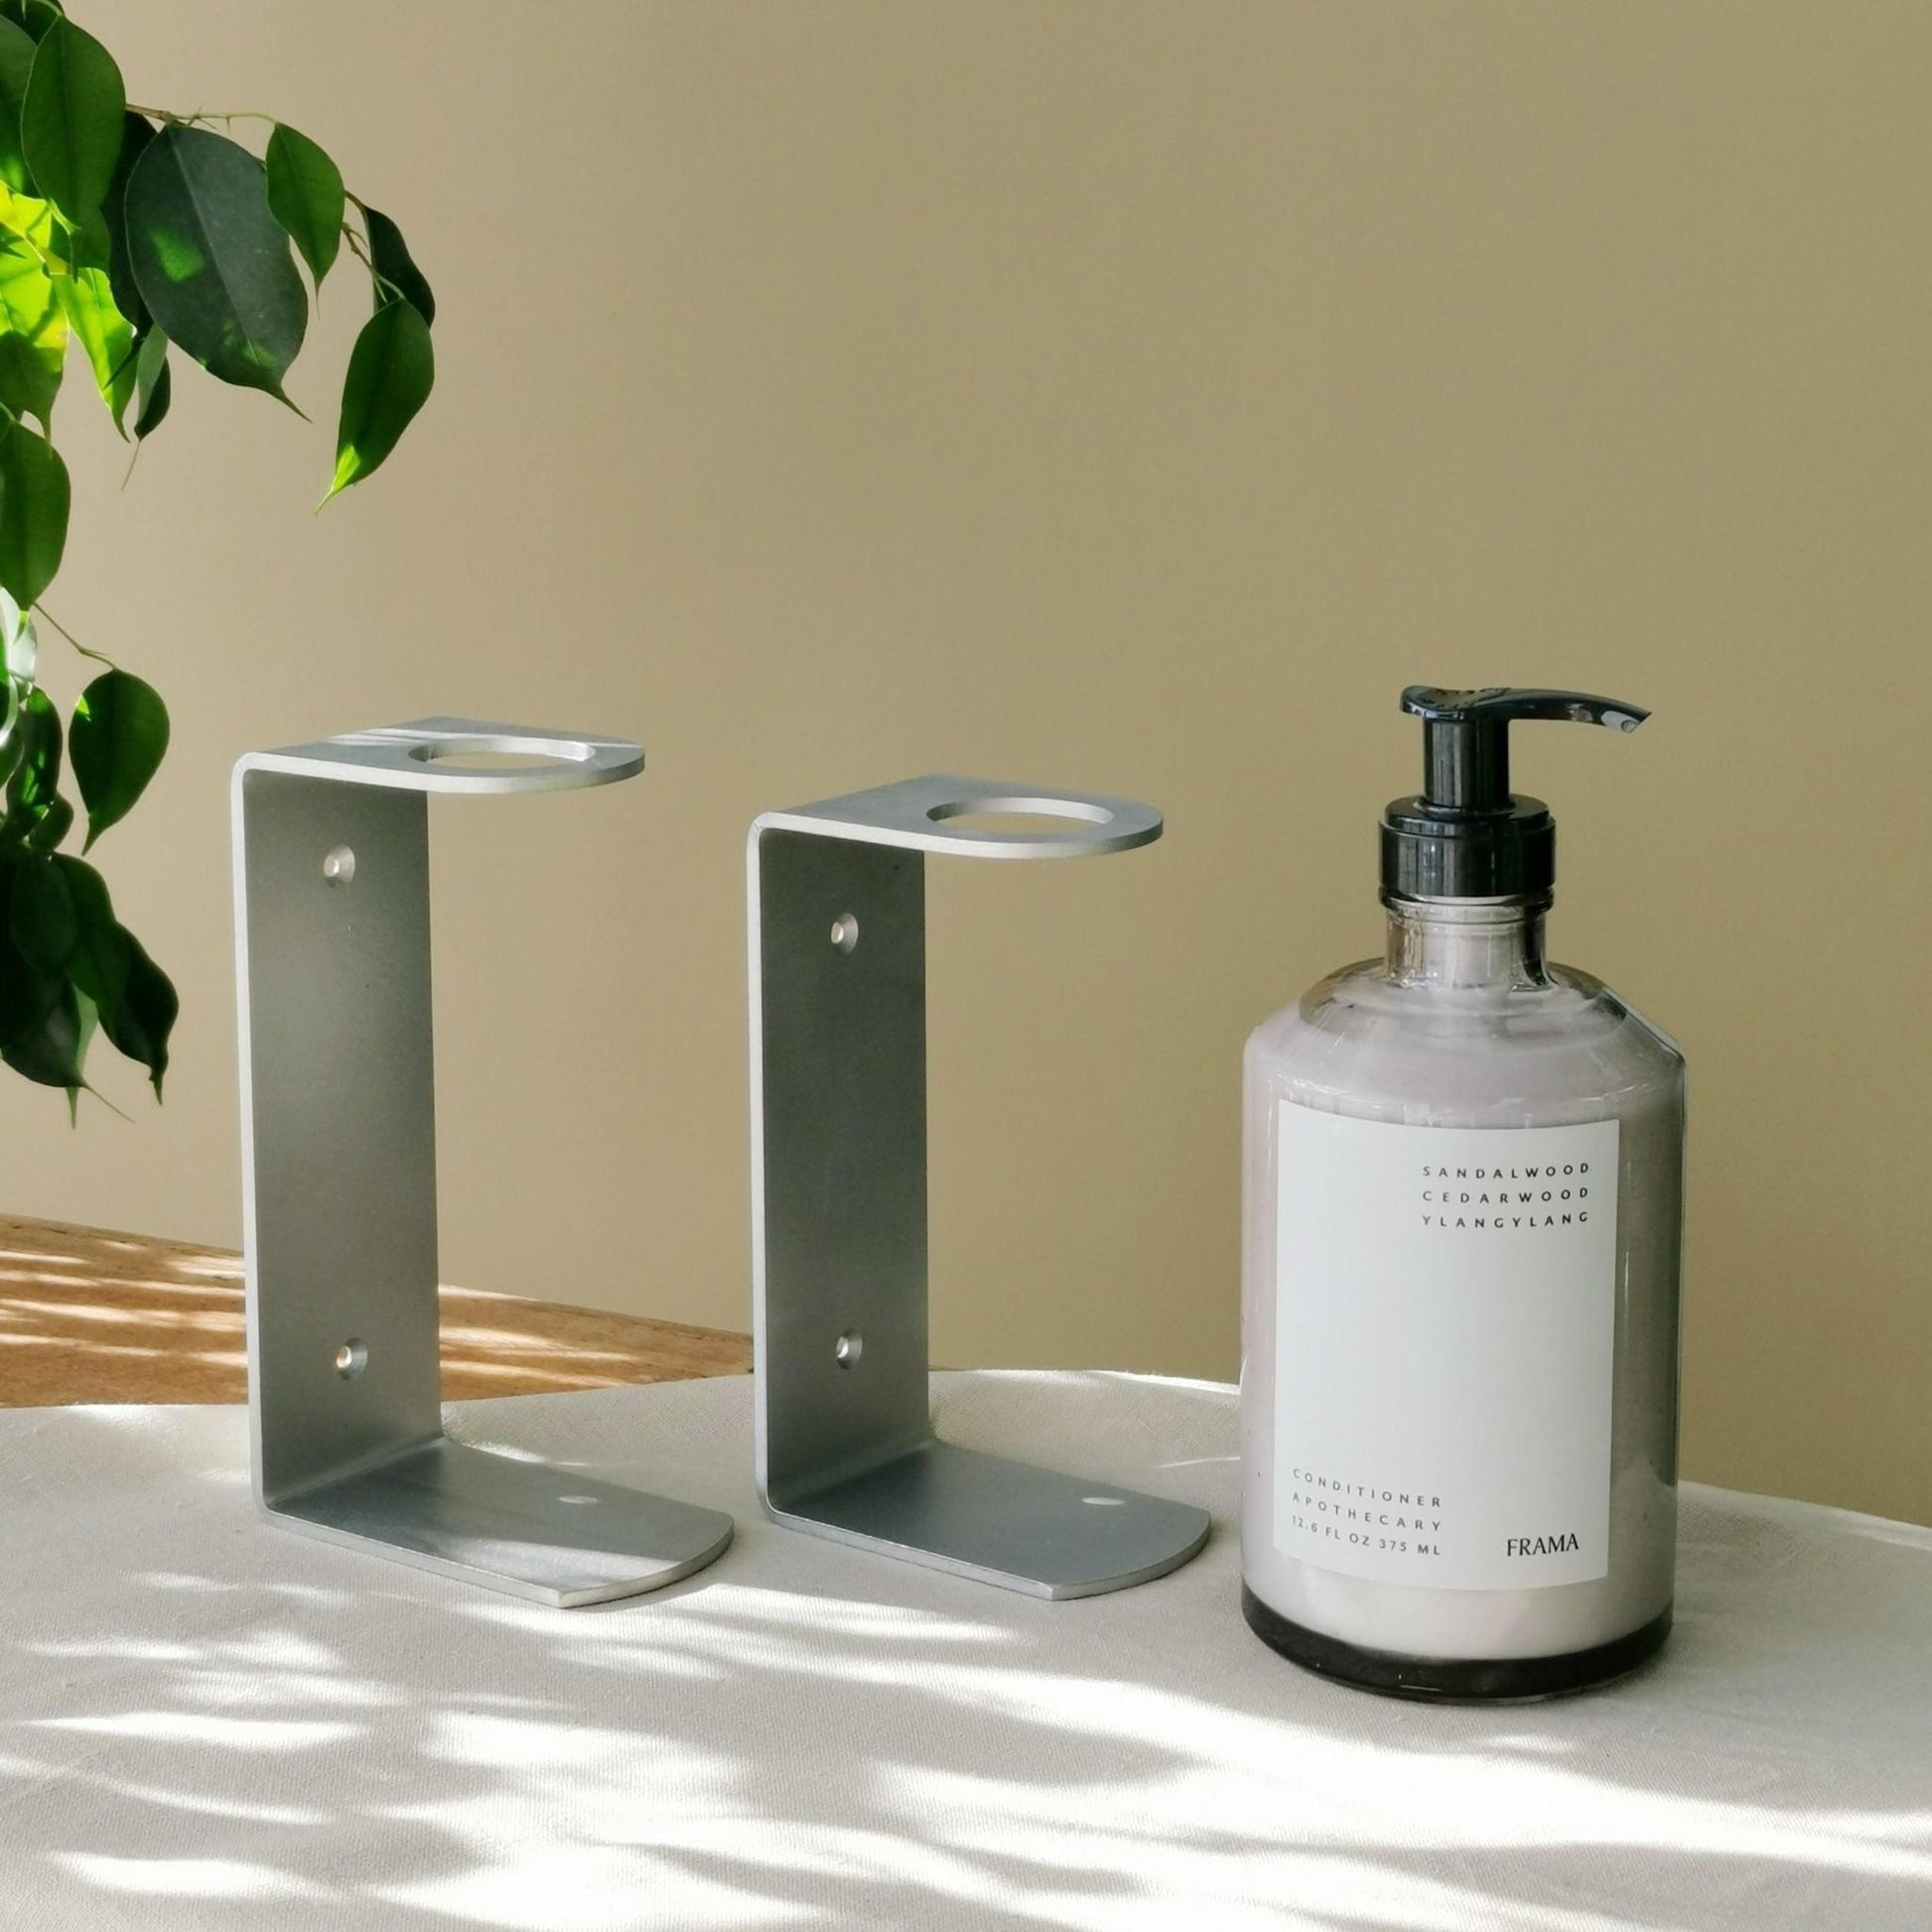 FRAMA Apothecary Wall Display Stainless Steel for  500ml bottles - THE PLANT SOCIETY